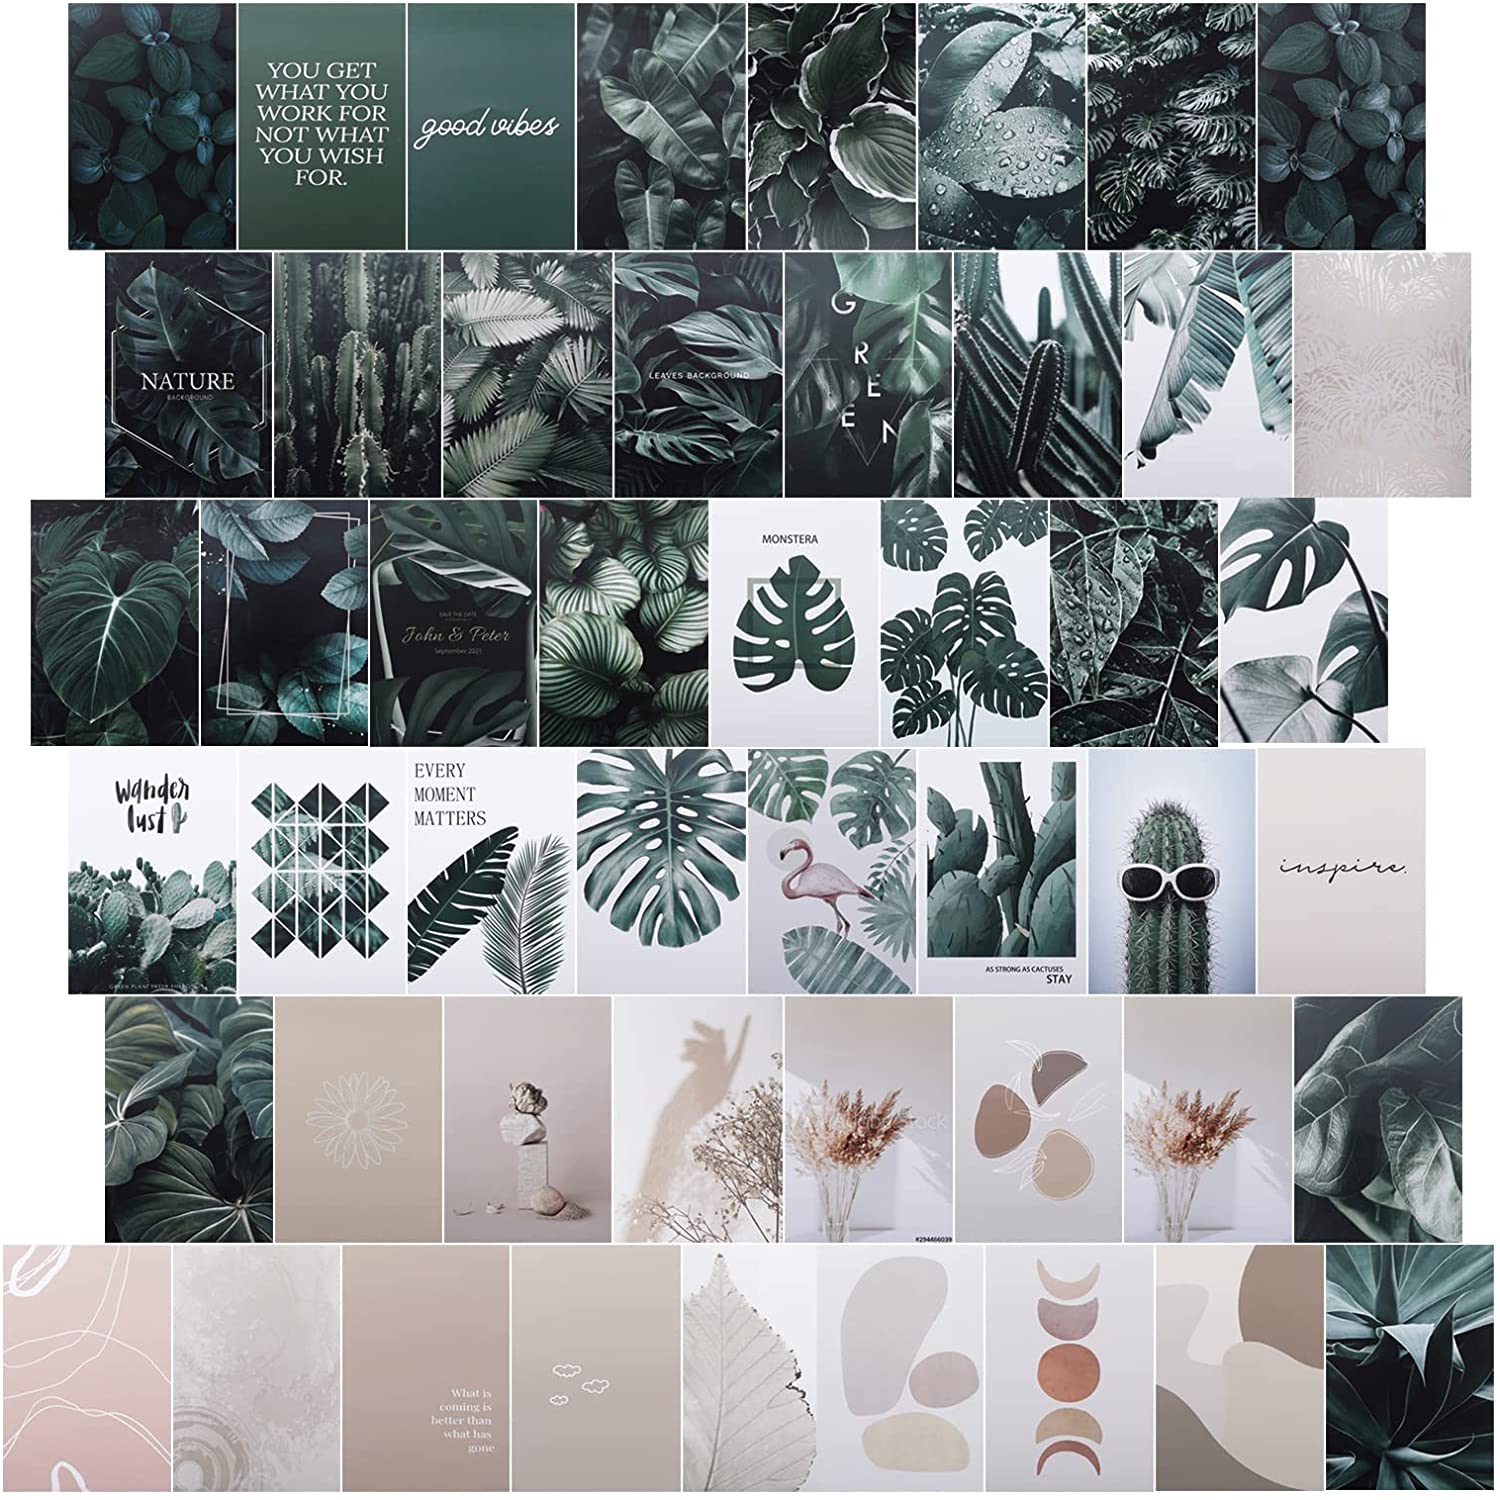 Buy Wall Collage Kit, Wall Collage Kit Aesthetic Picture, Photo Collage Kit for Wall Aesthetic Picture, 50 Set 4x6 Inch, VSCO Girls Bedroom Decor, Cute Boho Wall Decor, Plant Wall Art Collage